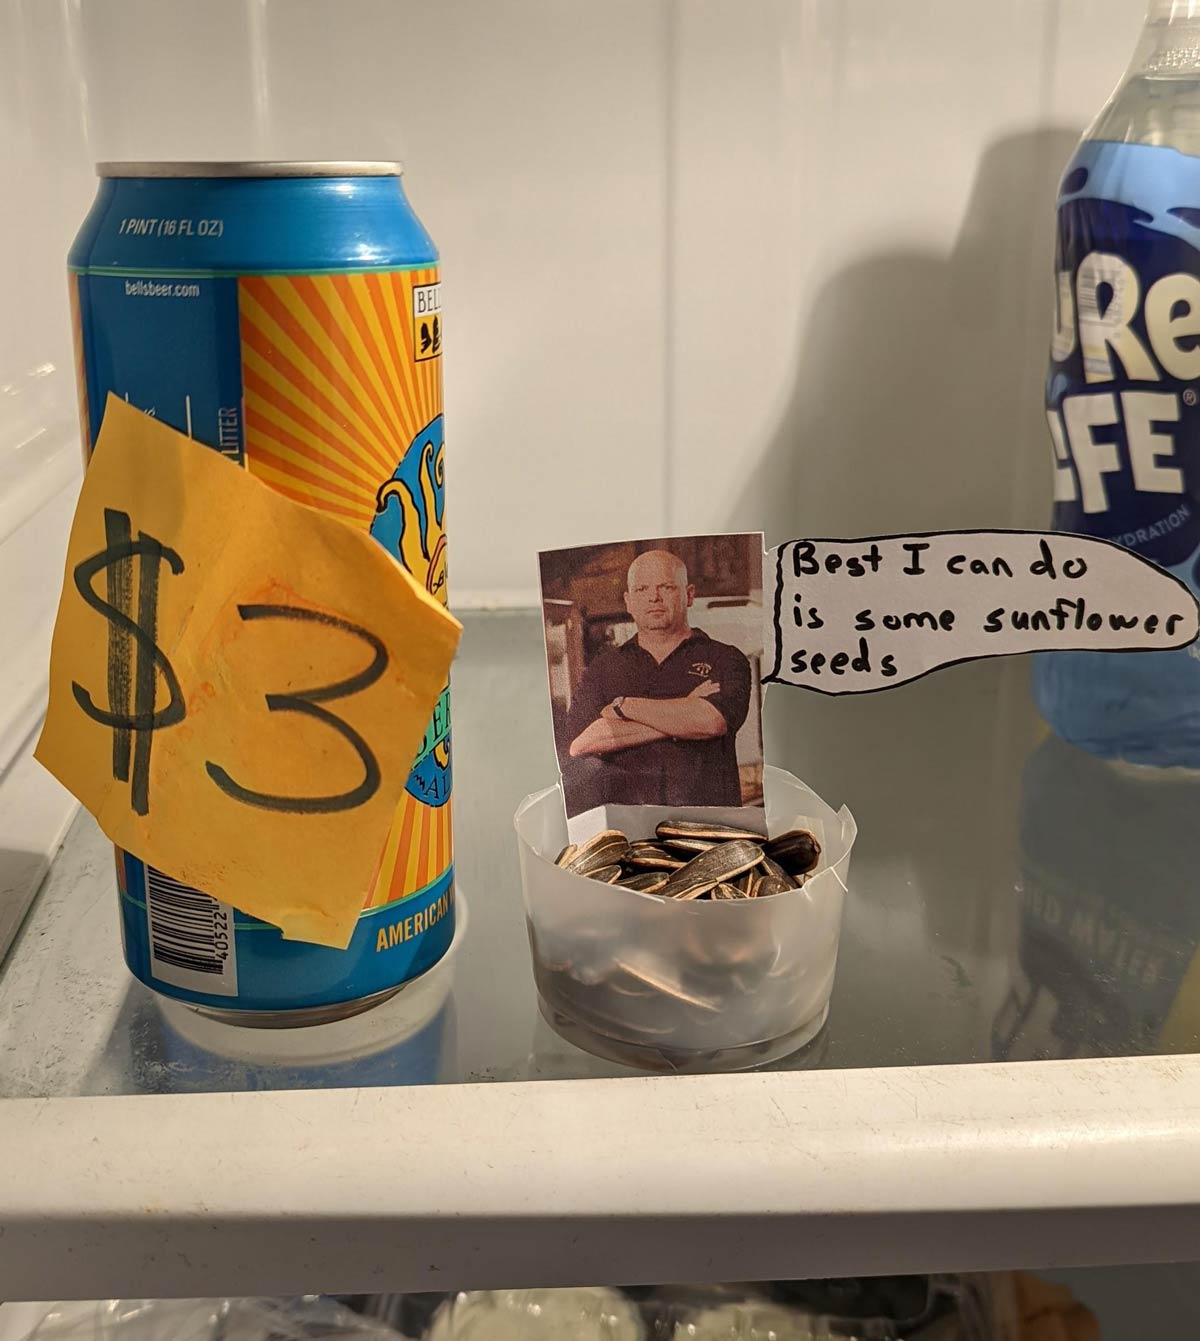 Coworker put a price on a beer in the fridge, I decided to haggle the price down